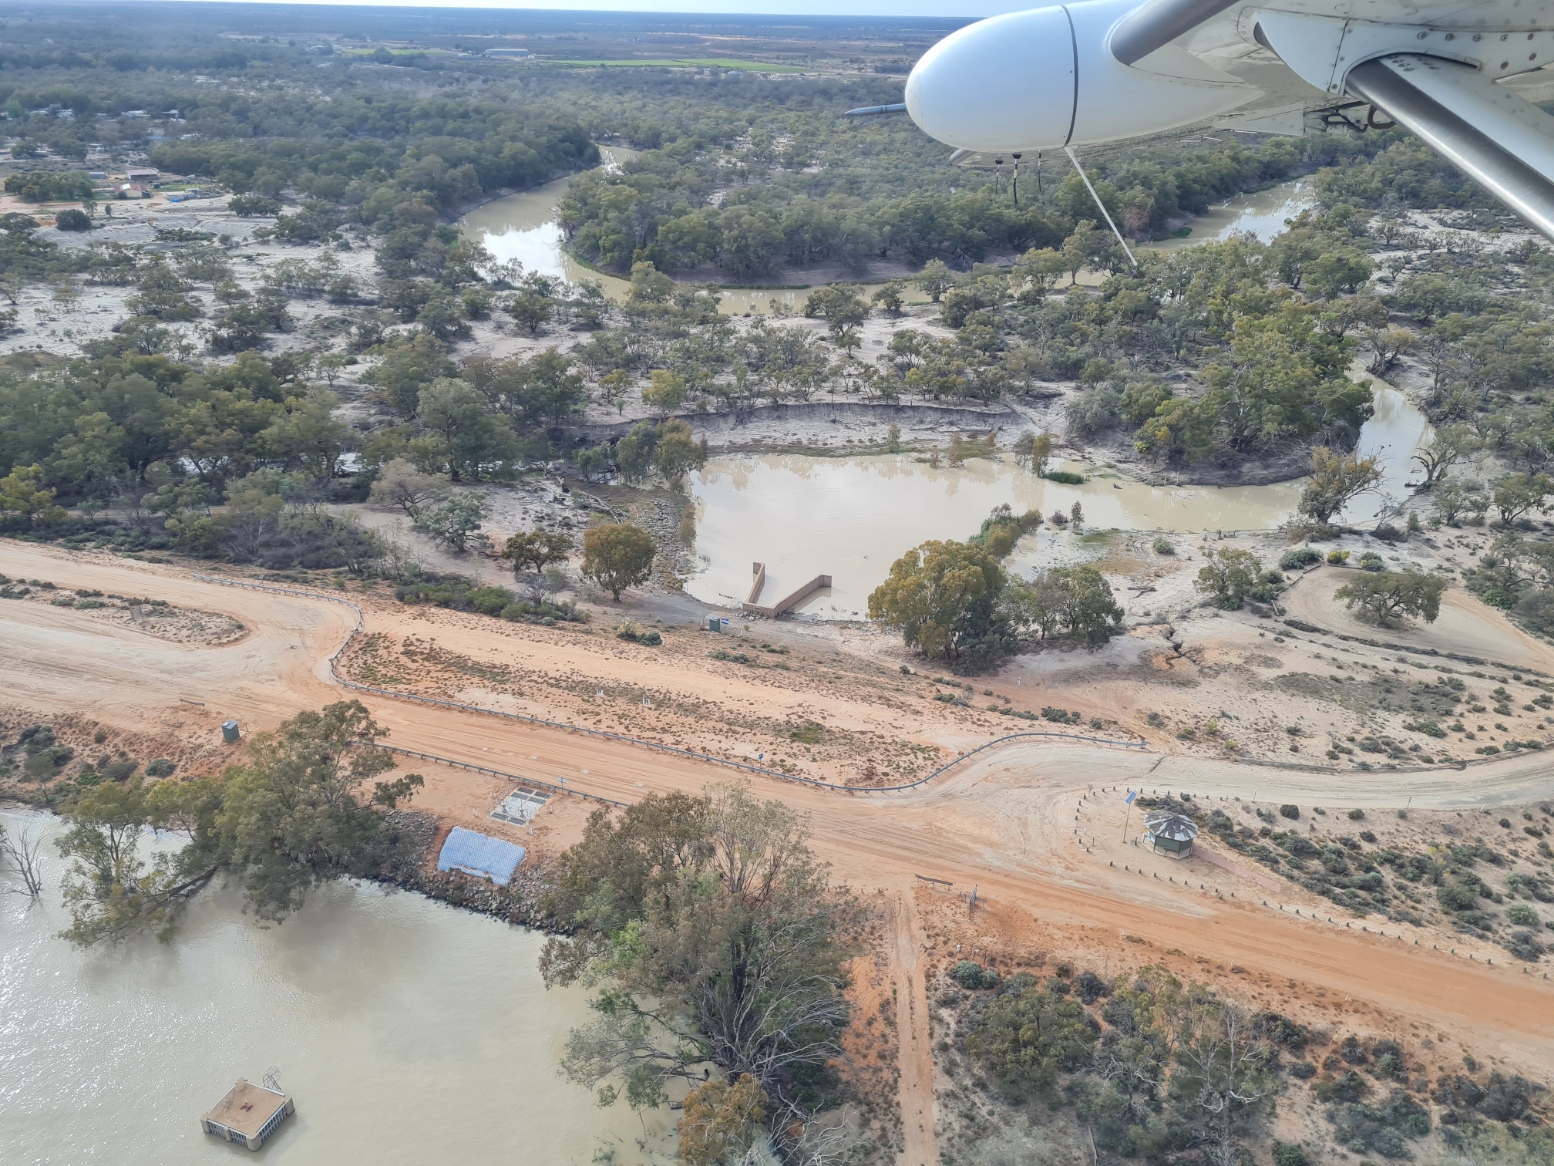 Water is let out of Lake Menindee into the Darling River through a regulator.